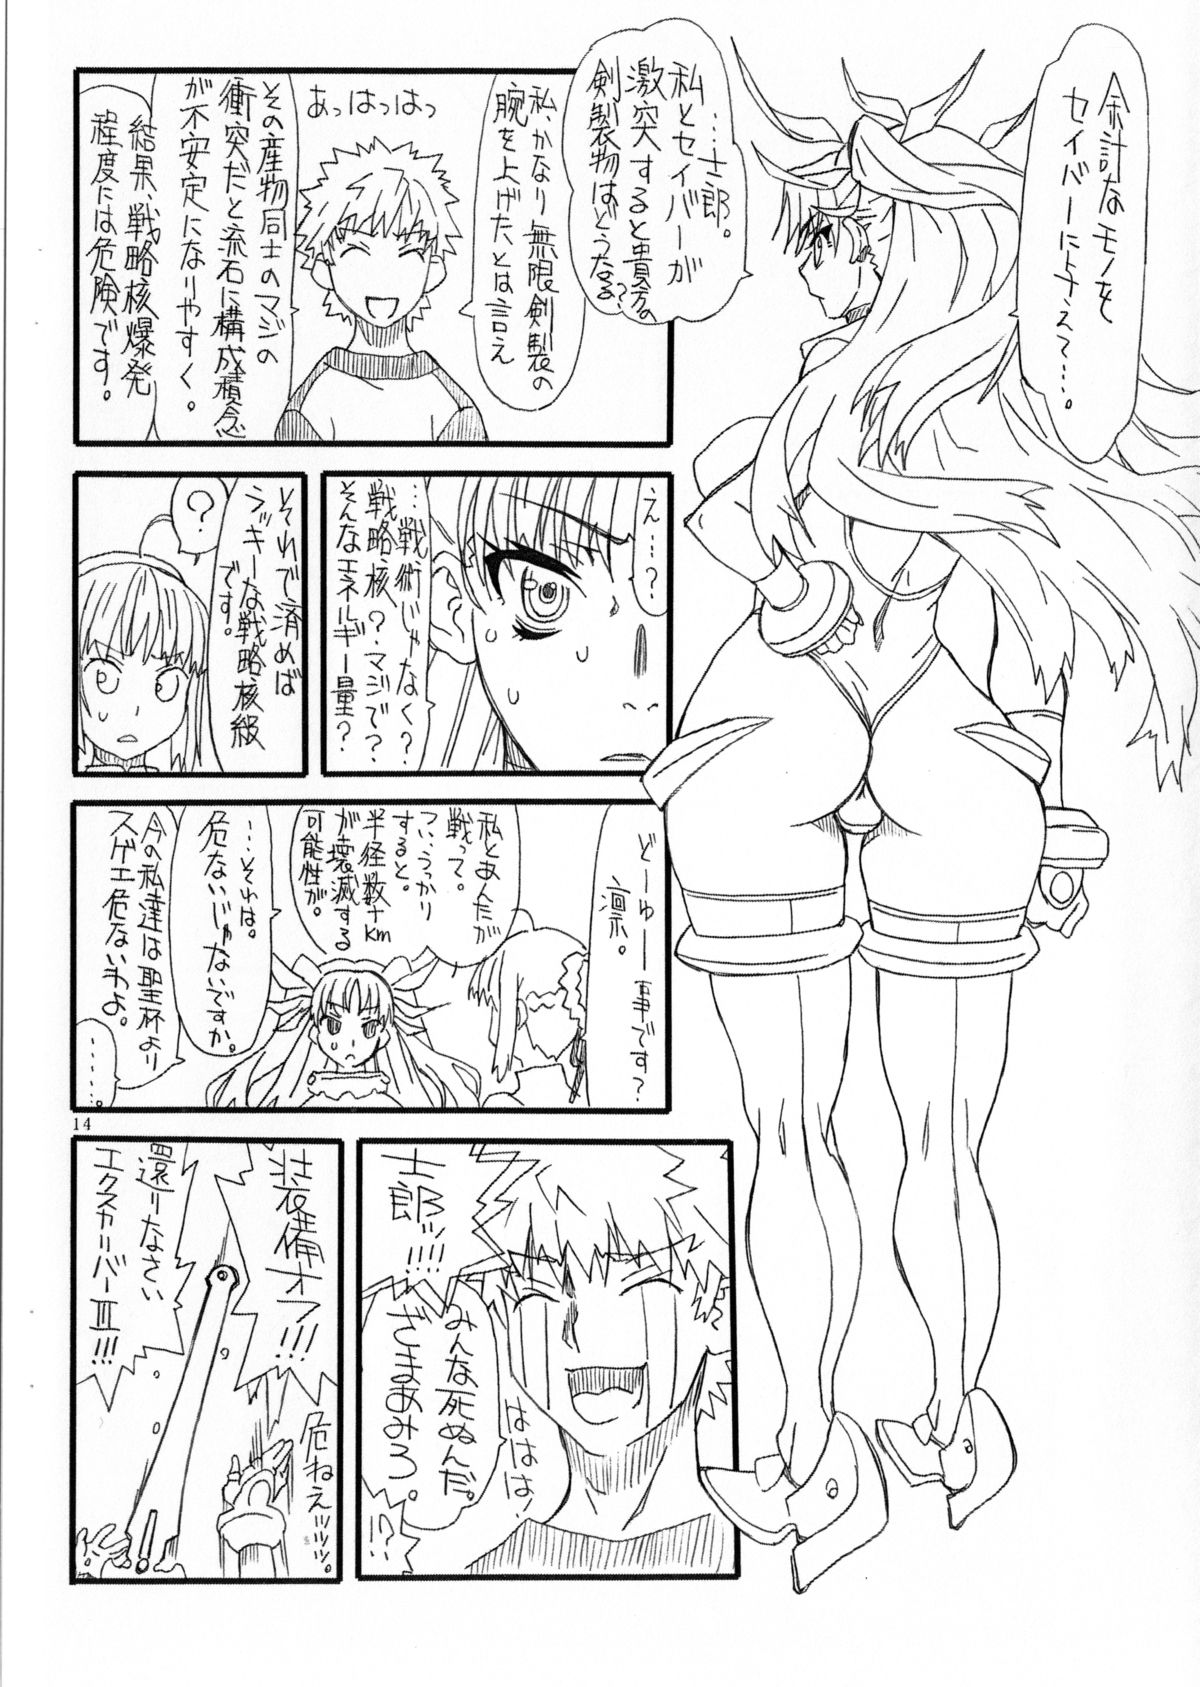 (SC65) [Power Slide (Uttorikun)] Rin to saber 1st Ver0.5 (Fate/stay night) page 15 full